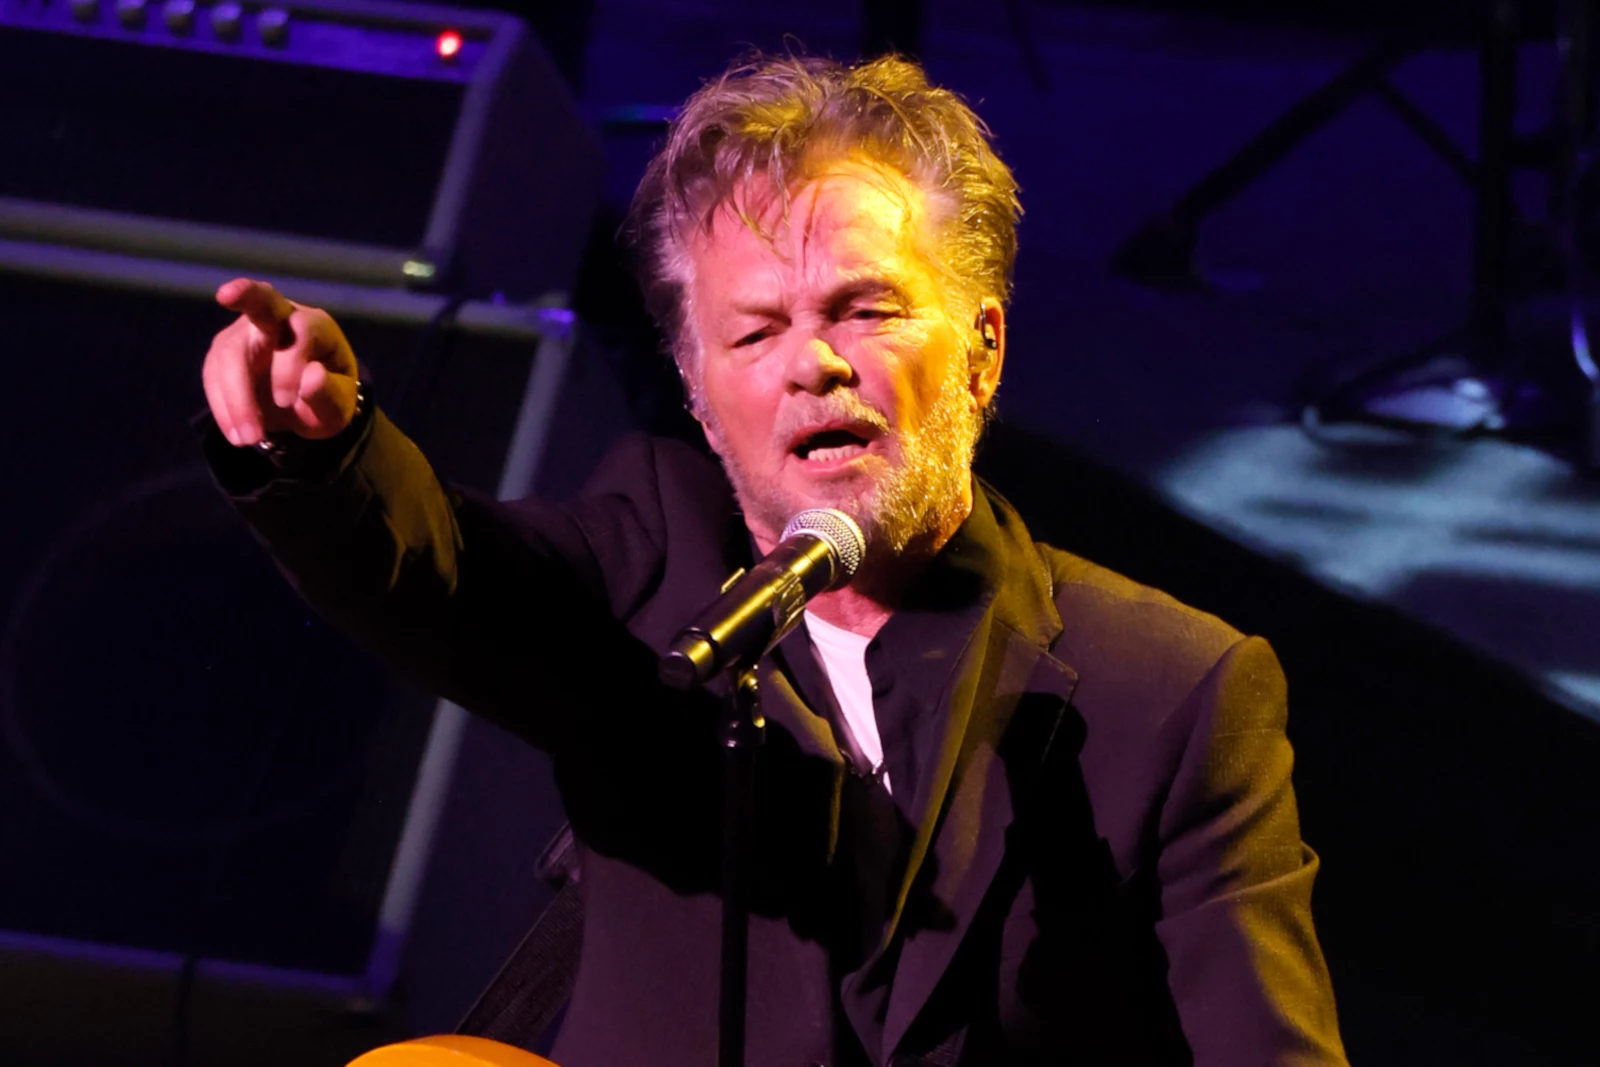 John Mellencamp Tells Fans to Behave or 'Don't Come to My Show'